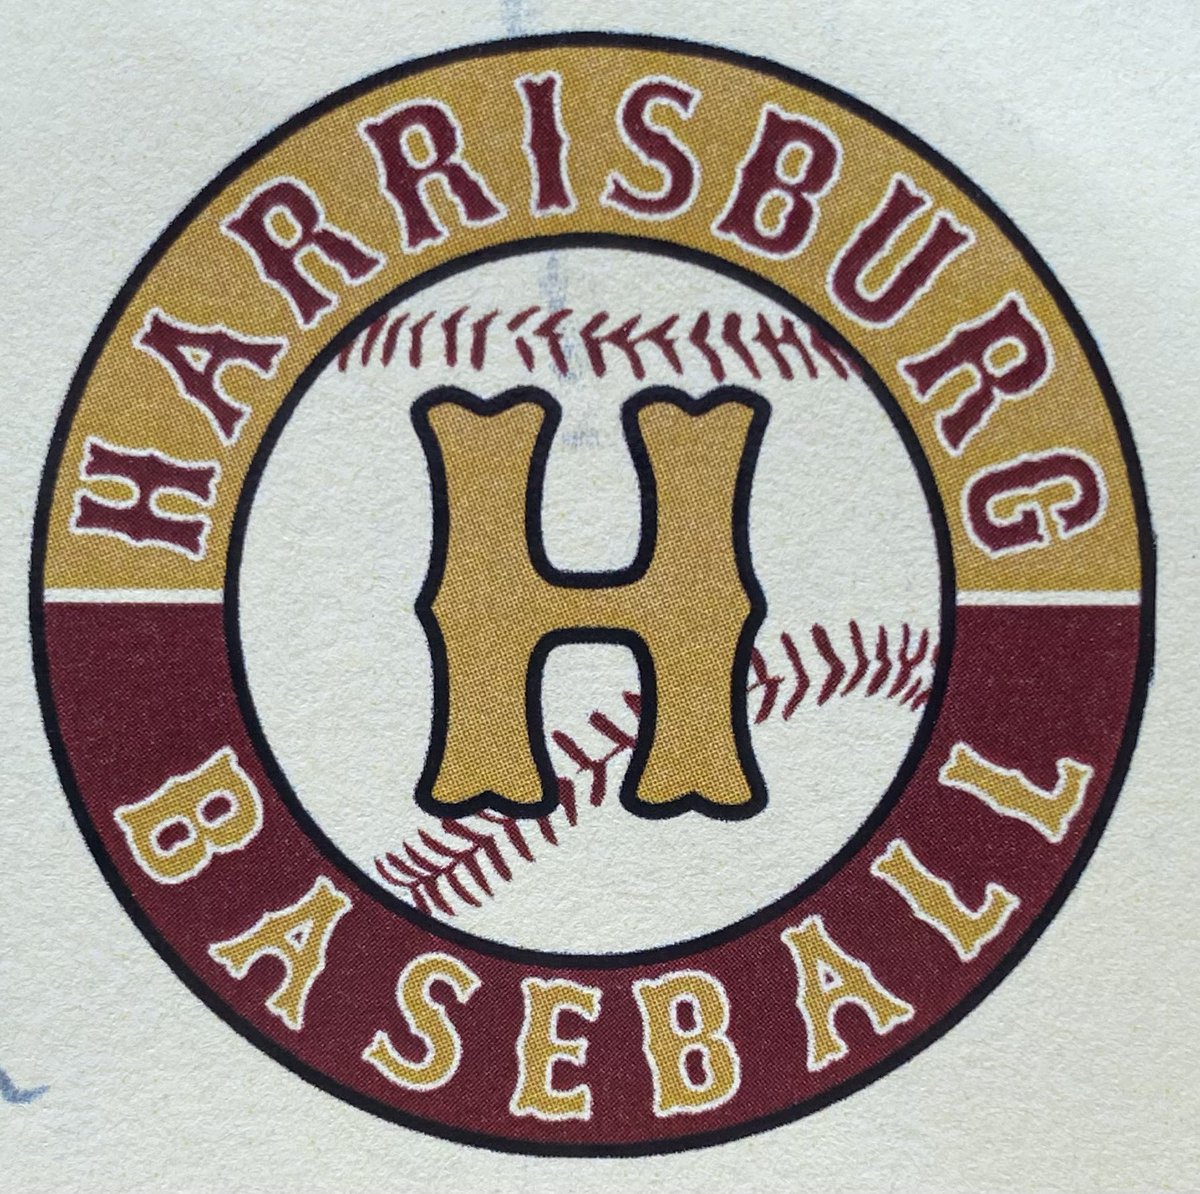 Correction: We are playing Harrisburg.